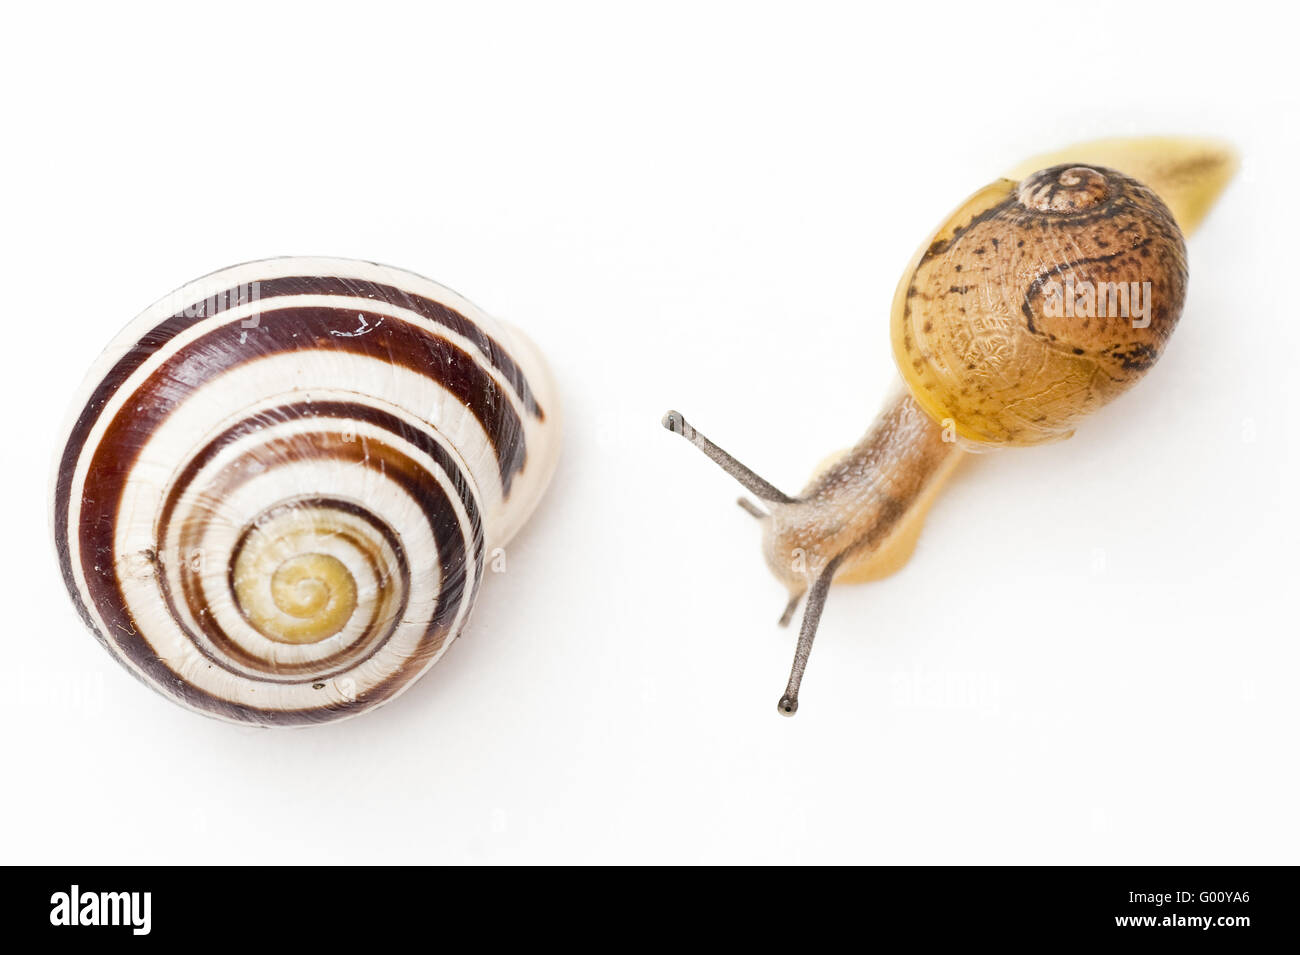 snail with shell Stock Photo